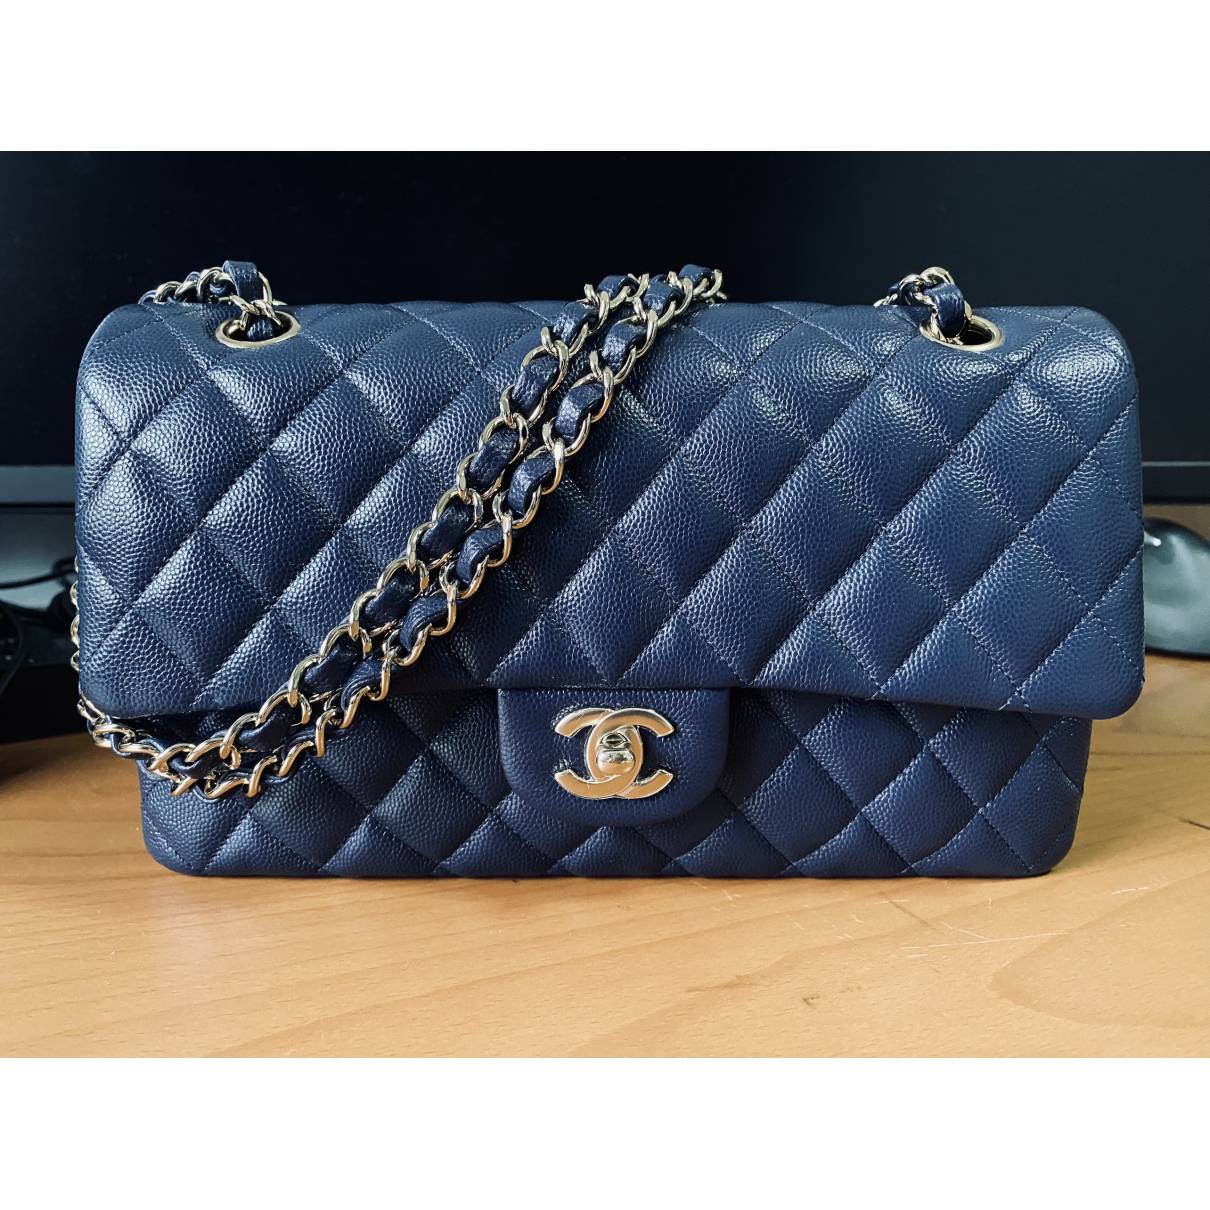 Chanel - Authenticated Timeless/Classique Handbag - Leather Navy for Women, Very Good Condition